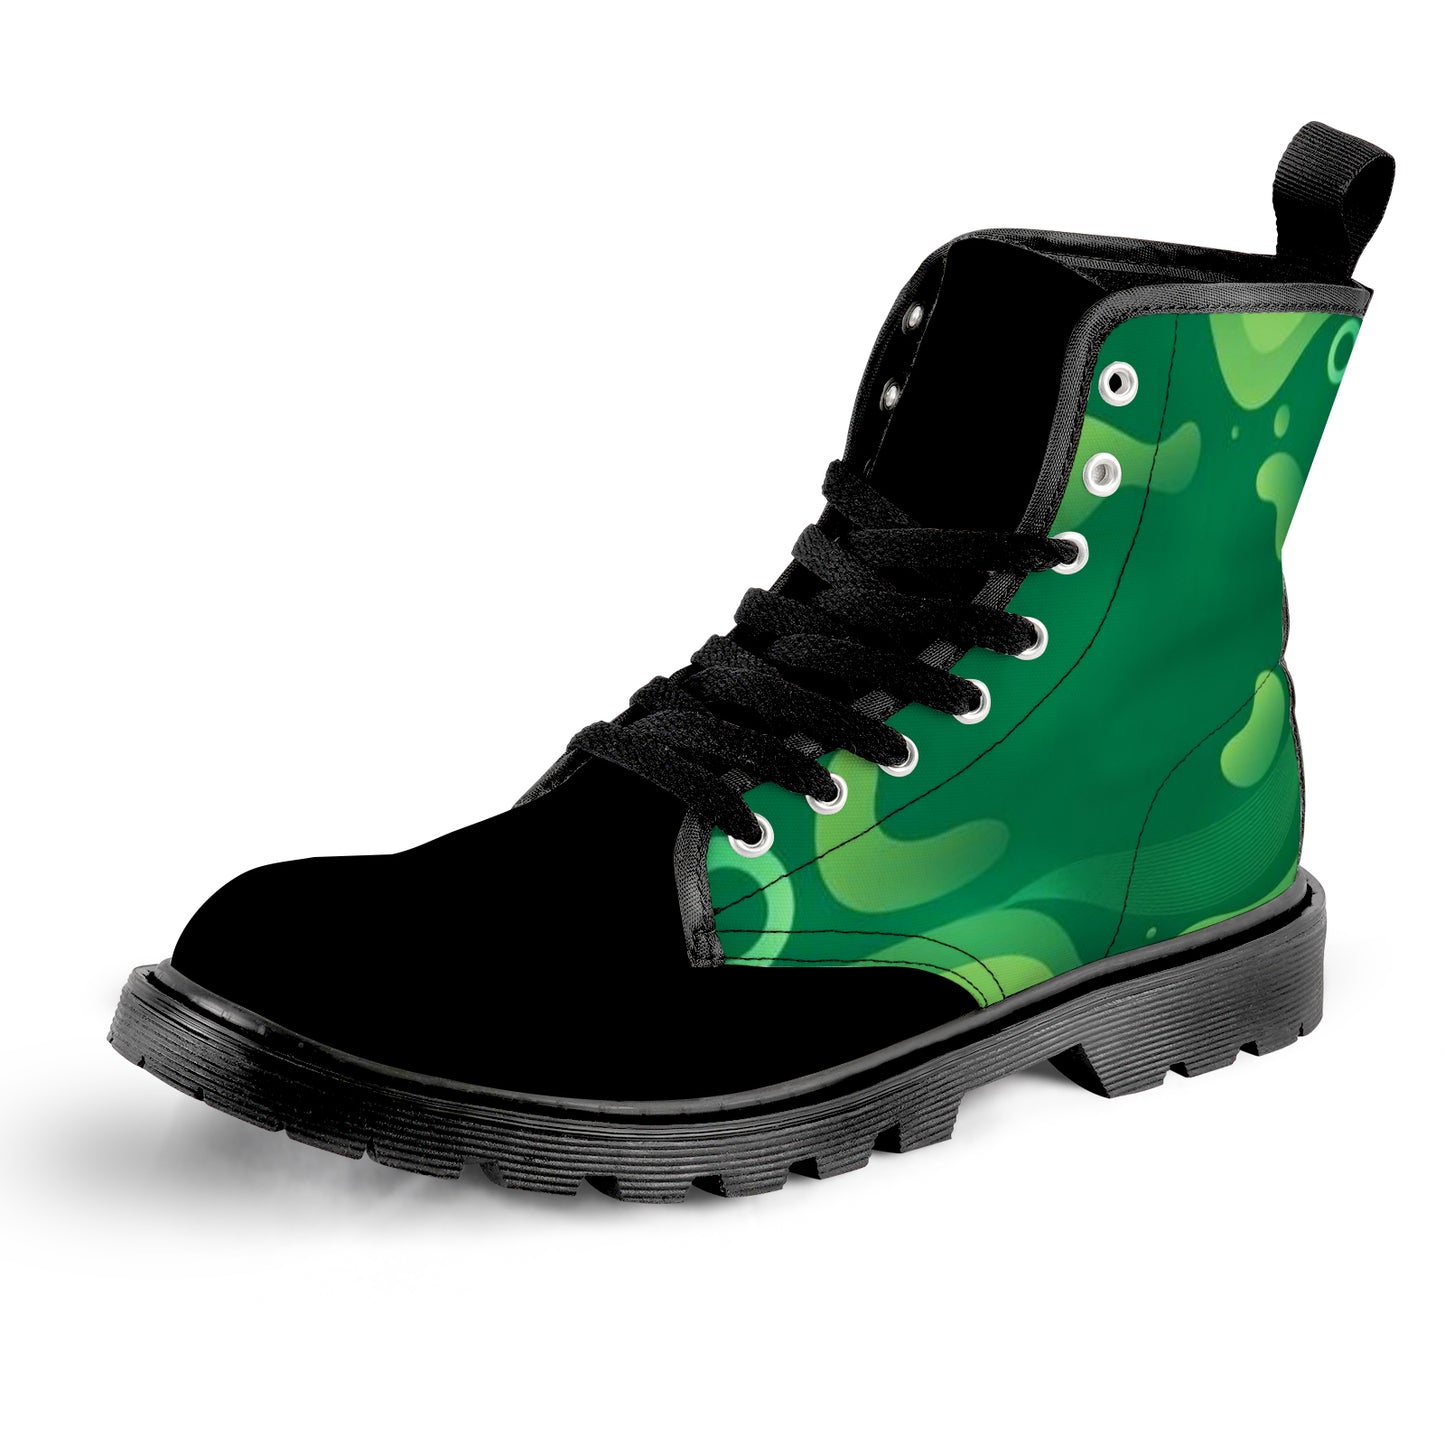 Men's Lace Up Canvas Boots - Dark Green